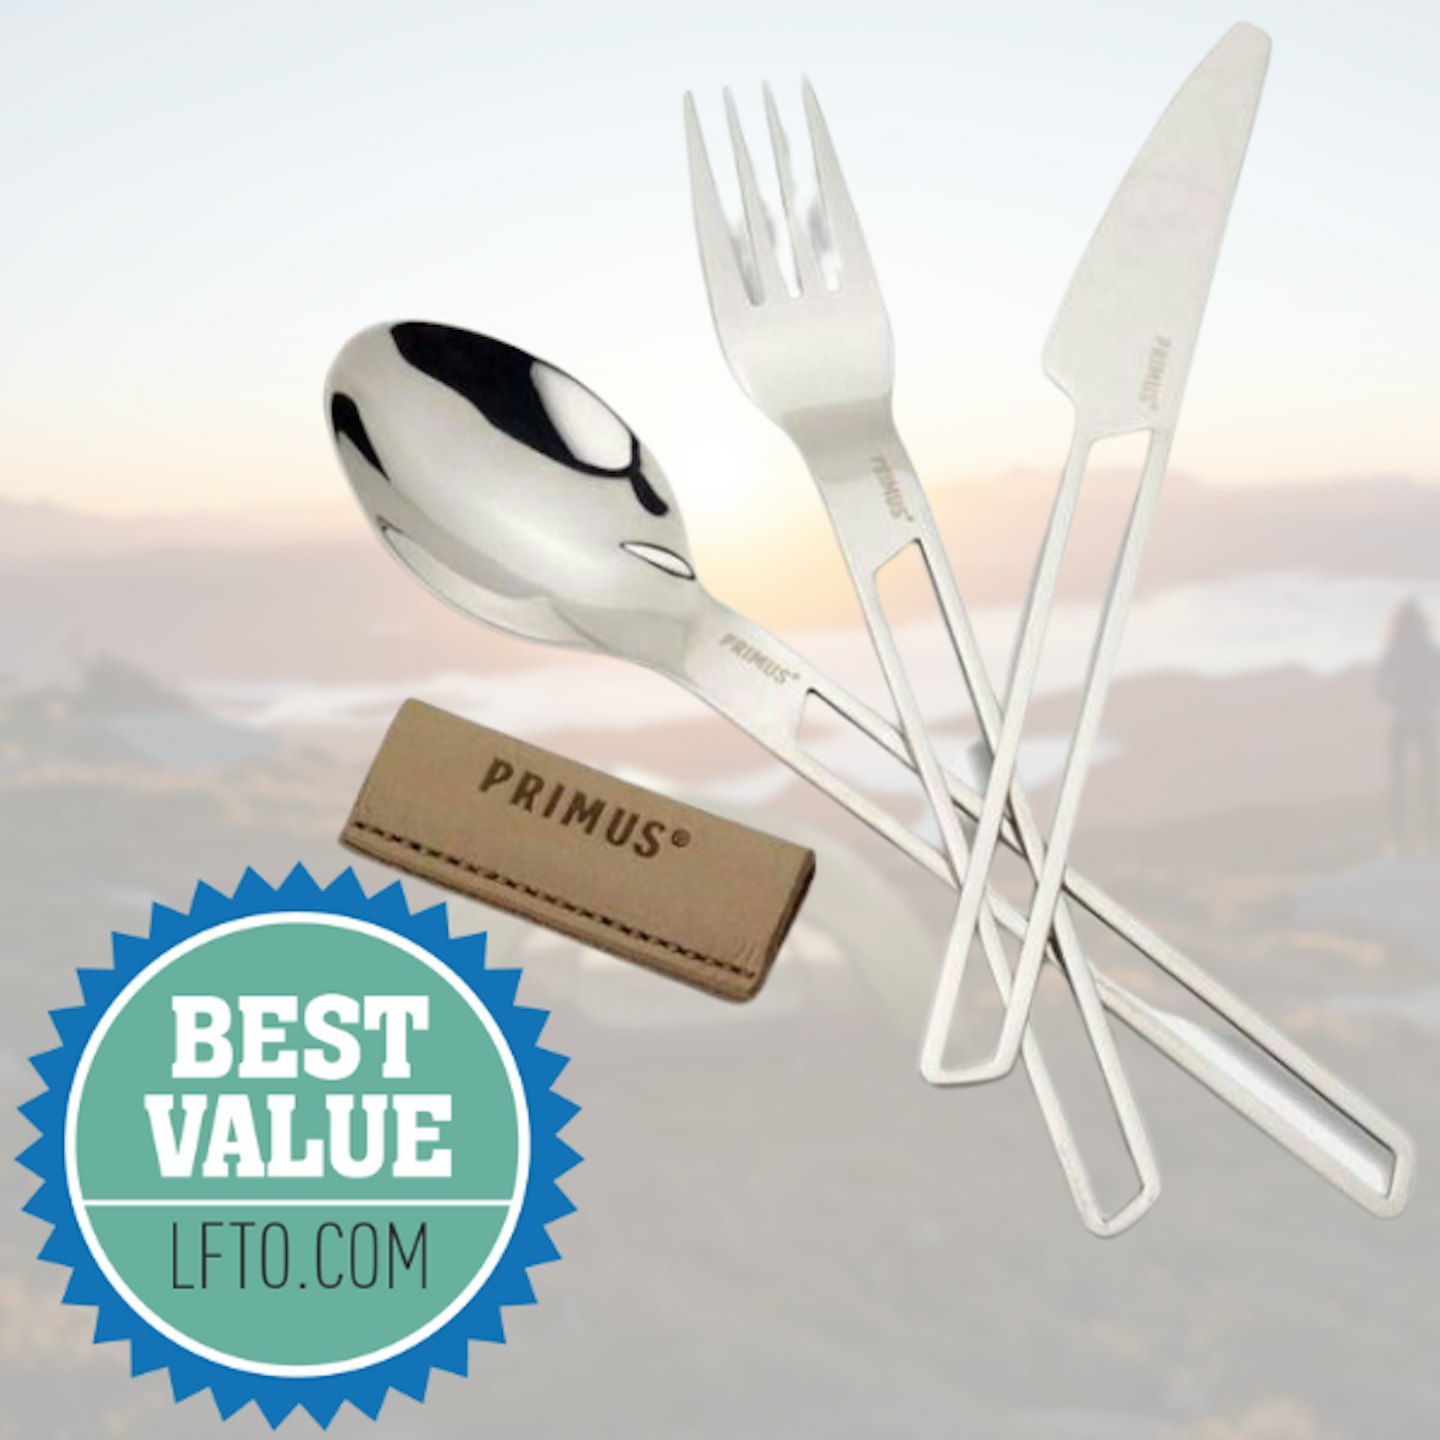 Primus Campfire Cutlery Set with award overlay